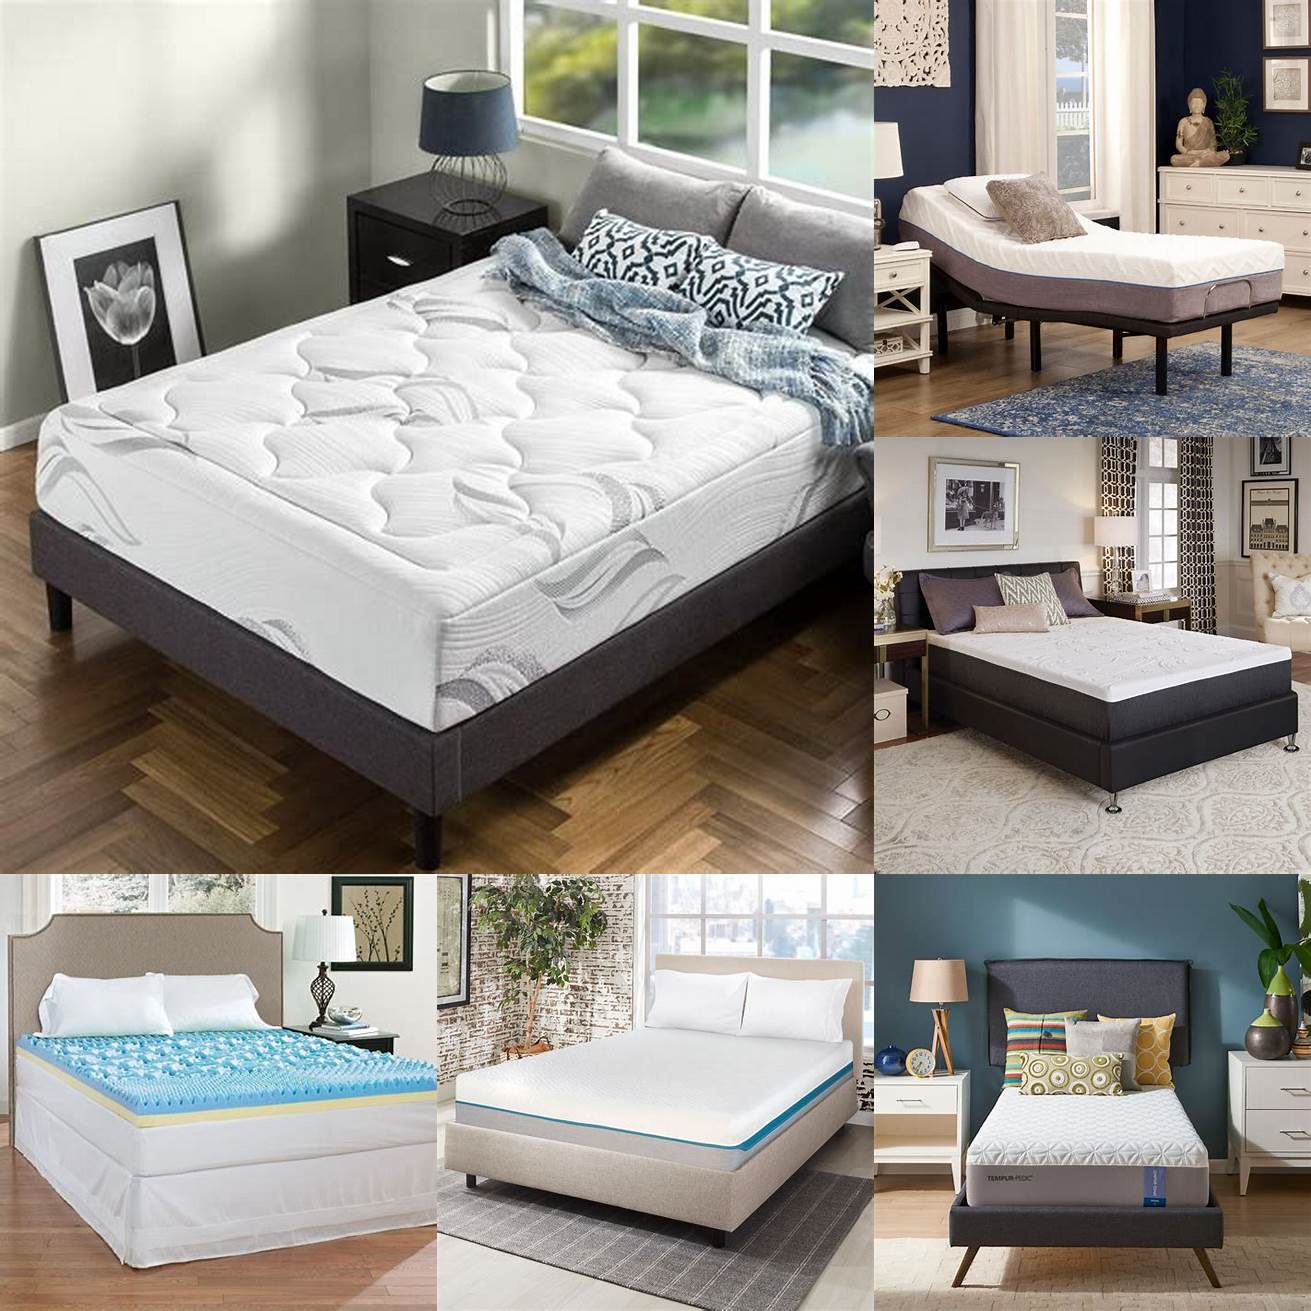 Weight Memory foam beds can be heavy and difficult to move making them less than ideal for those who move frequently